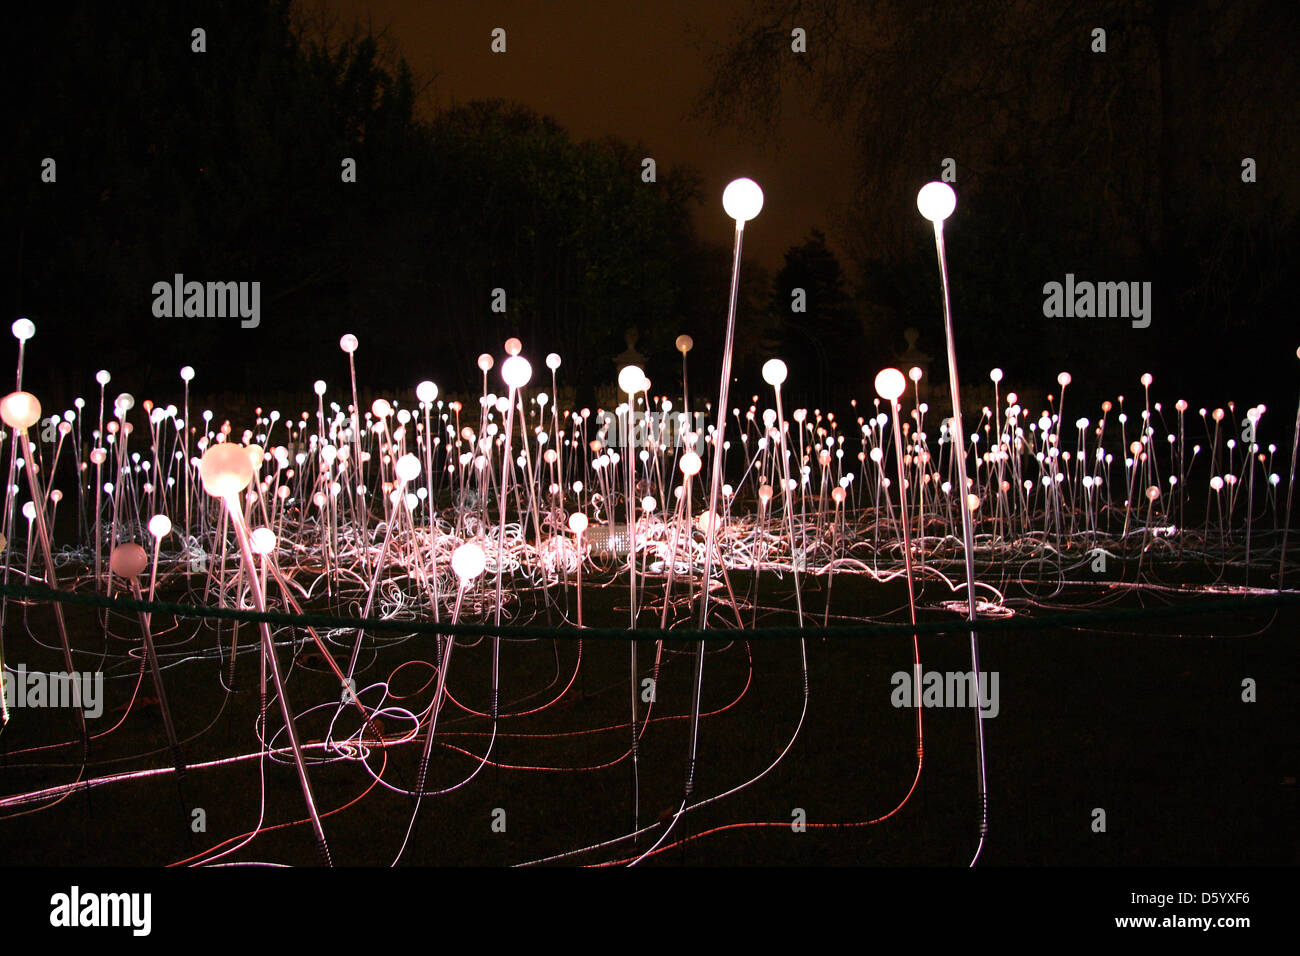 Bruce Munro’s Field of Light at the Holburne Museum, Bath, UK Stock Photo